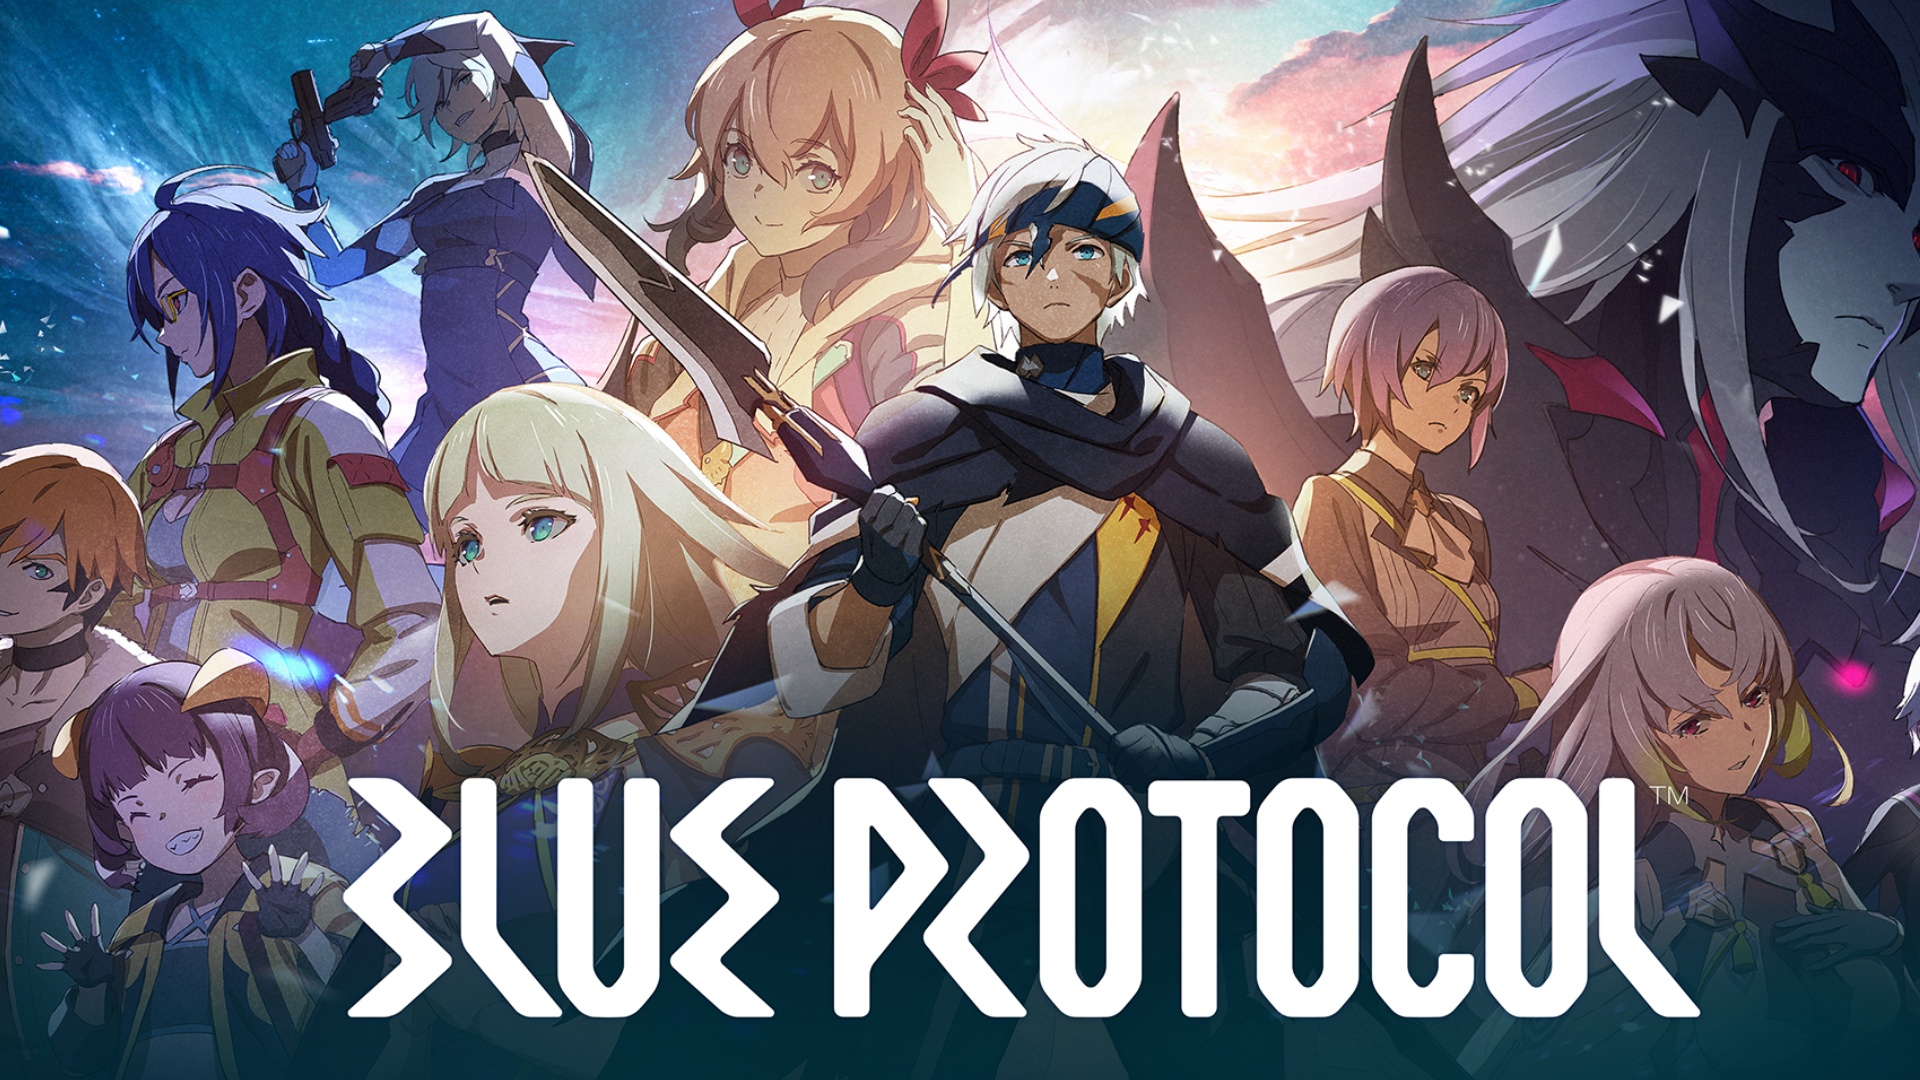 Blue Protocol launches an opening cinematic in the purest style of animated series